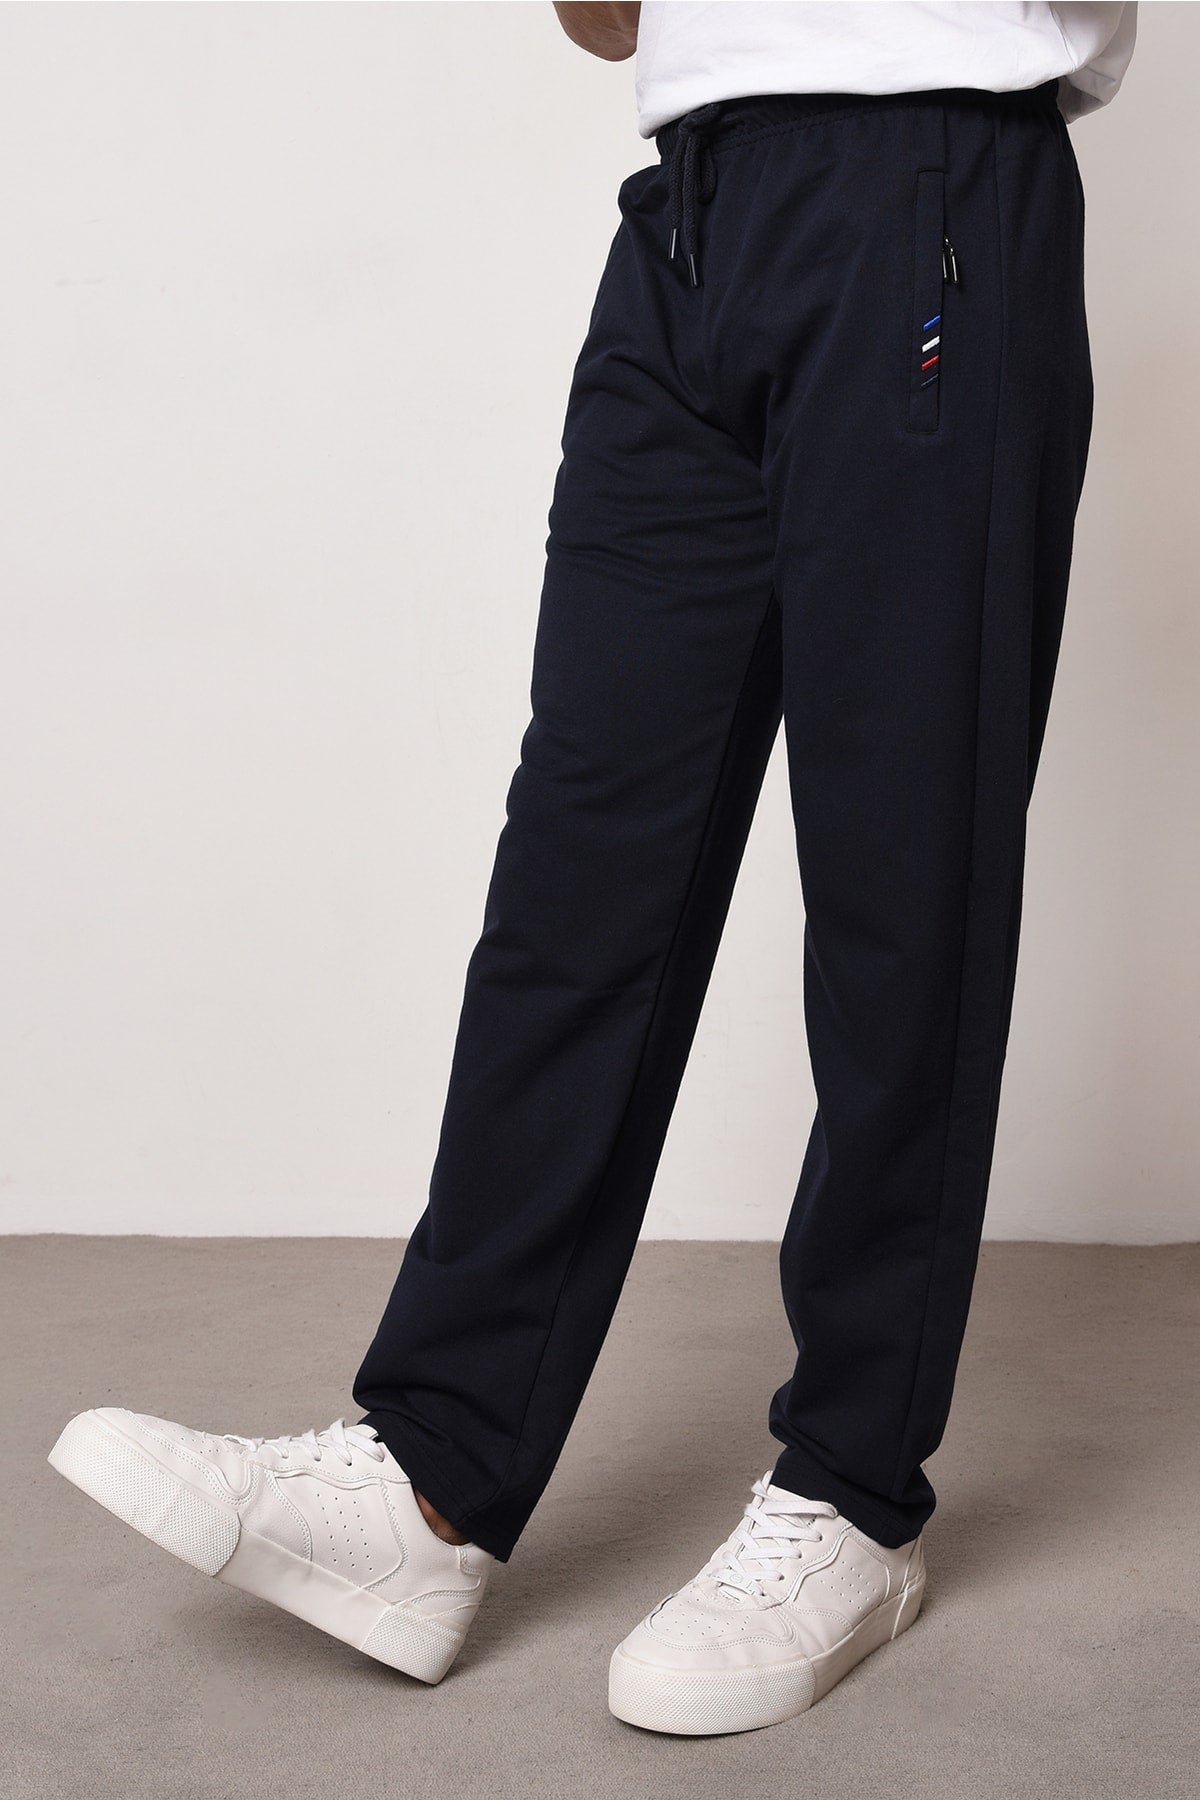 Navy Blue-Grey Men's Zipper Pocket Embroidery Detailed Straight Leg Relaxed Cut 2-Pack of Sweatpants